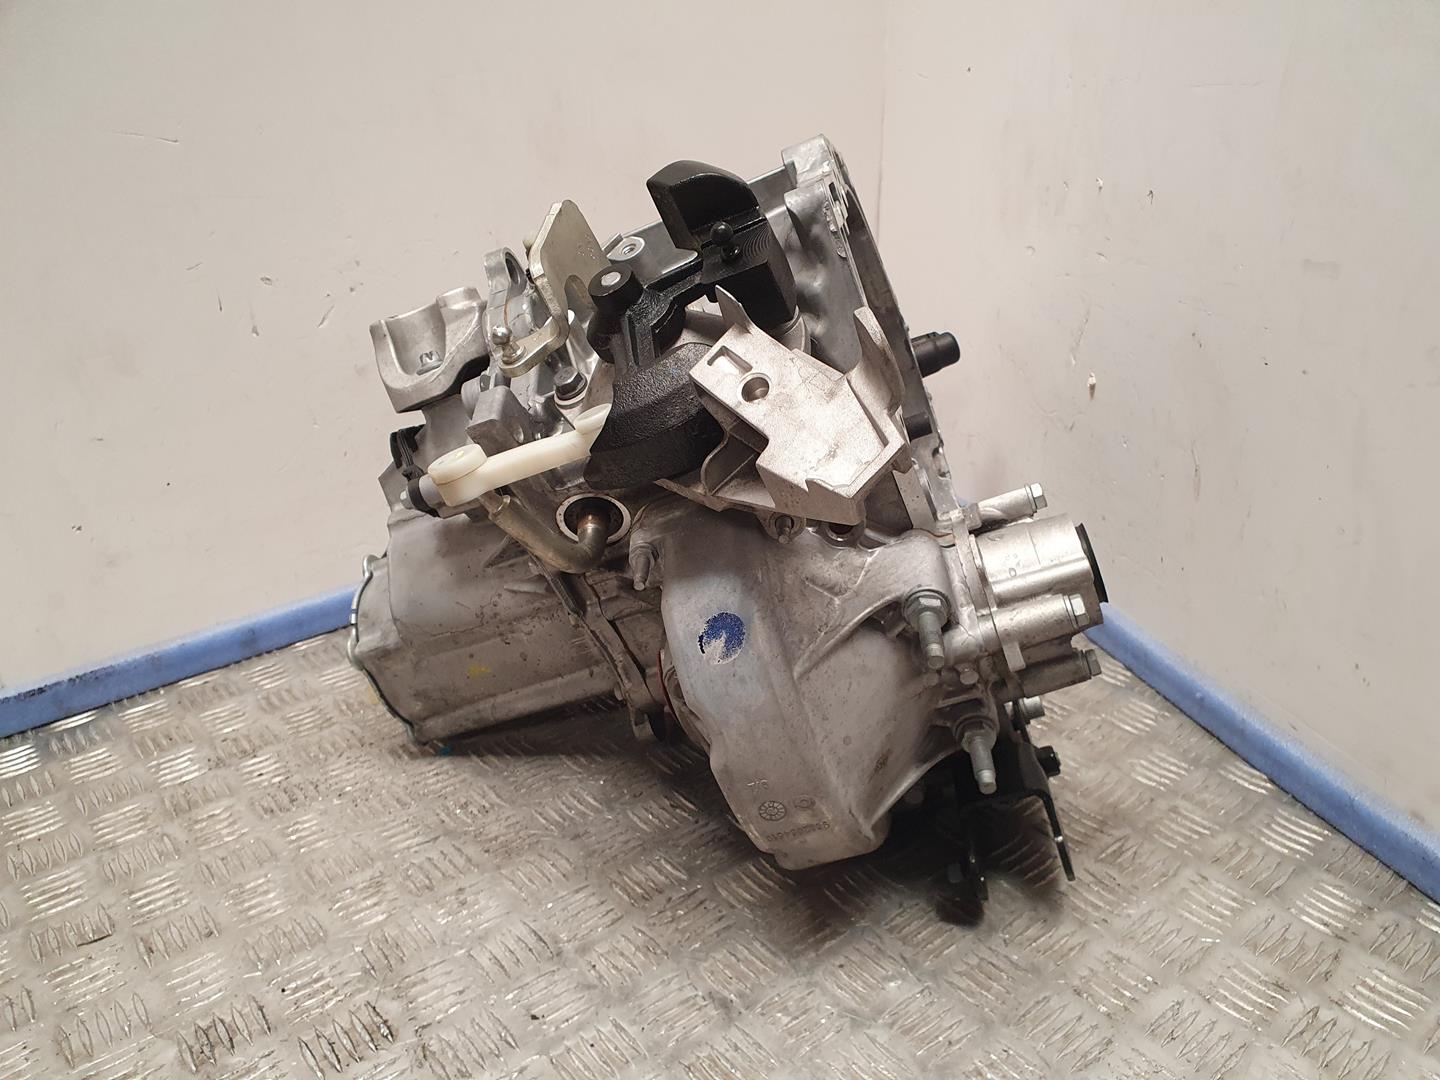 OPEL Corsa F (2019-2023) Gearbox 20V25T, 0906142, 6VELOCIDADES 24039385